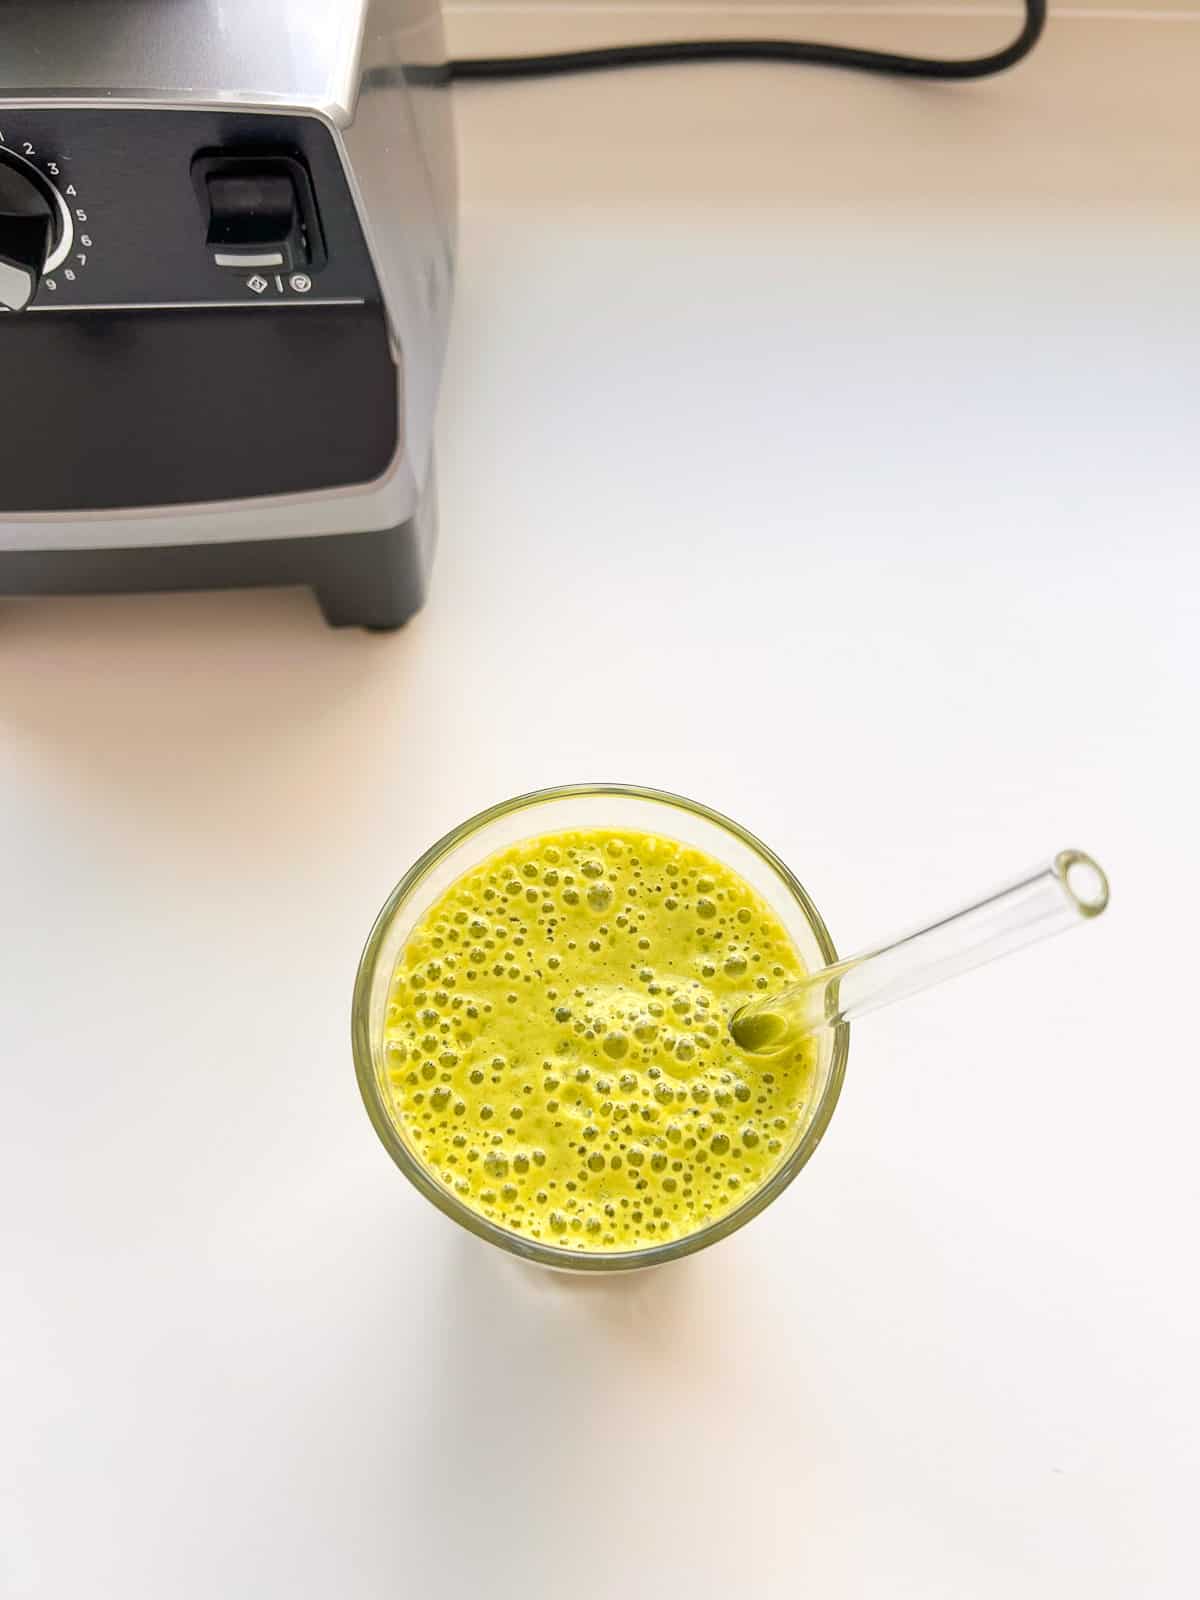 An image of a green smoothie near the base of a blender.